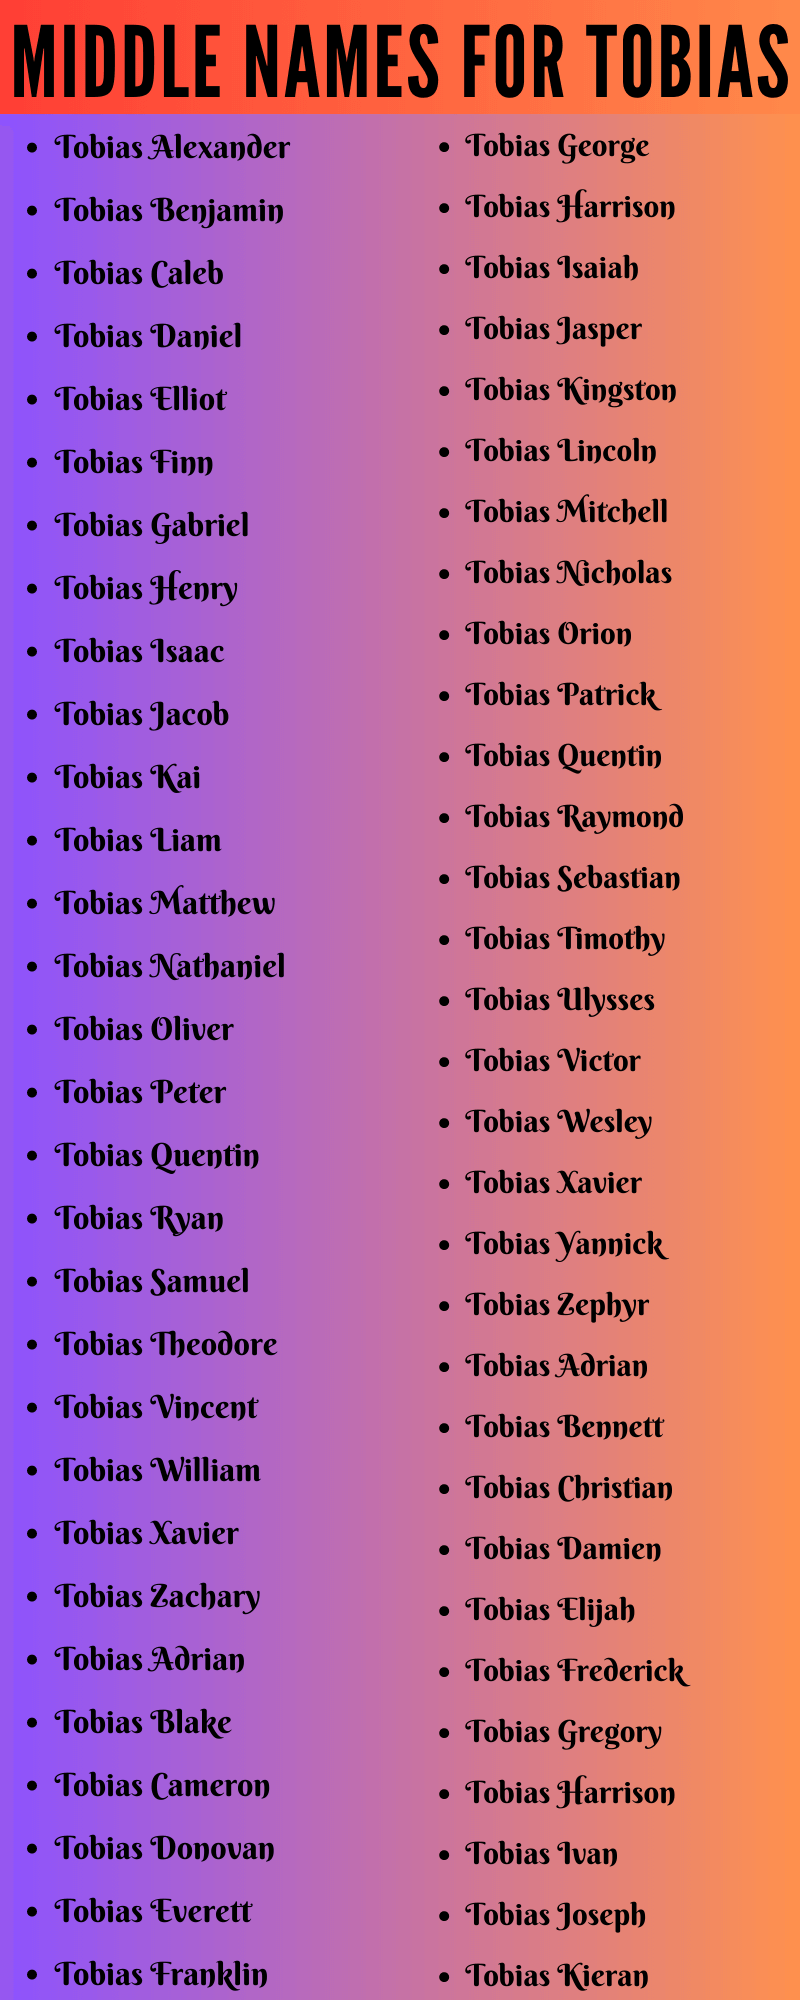 400 Best Middle Names For Tobias